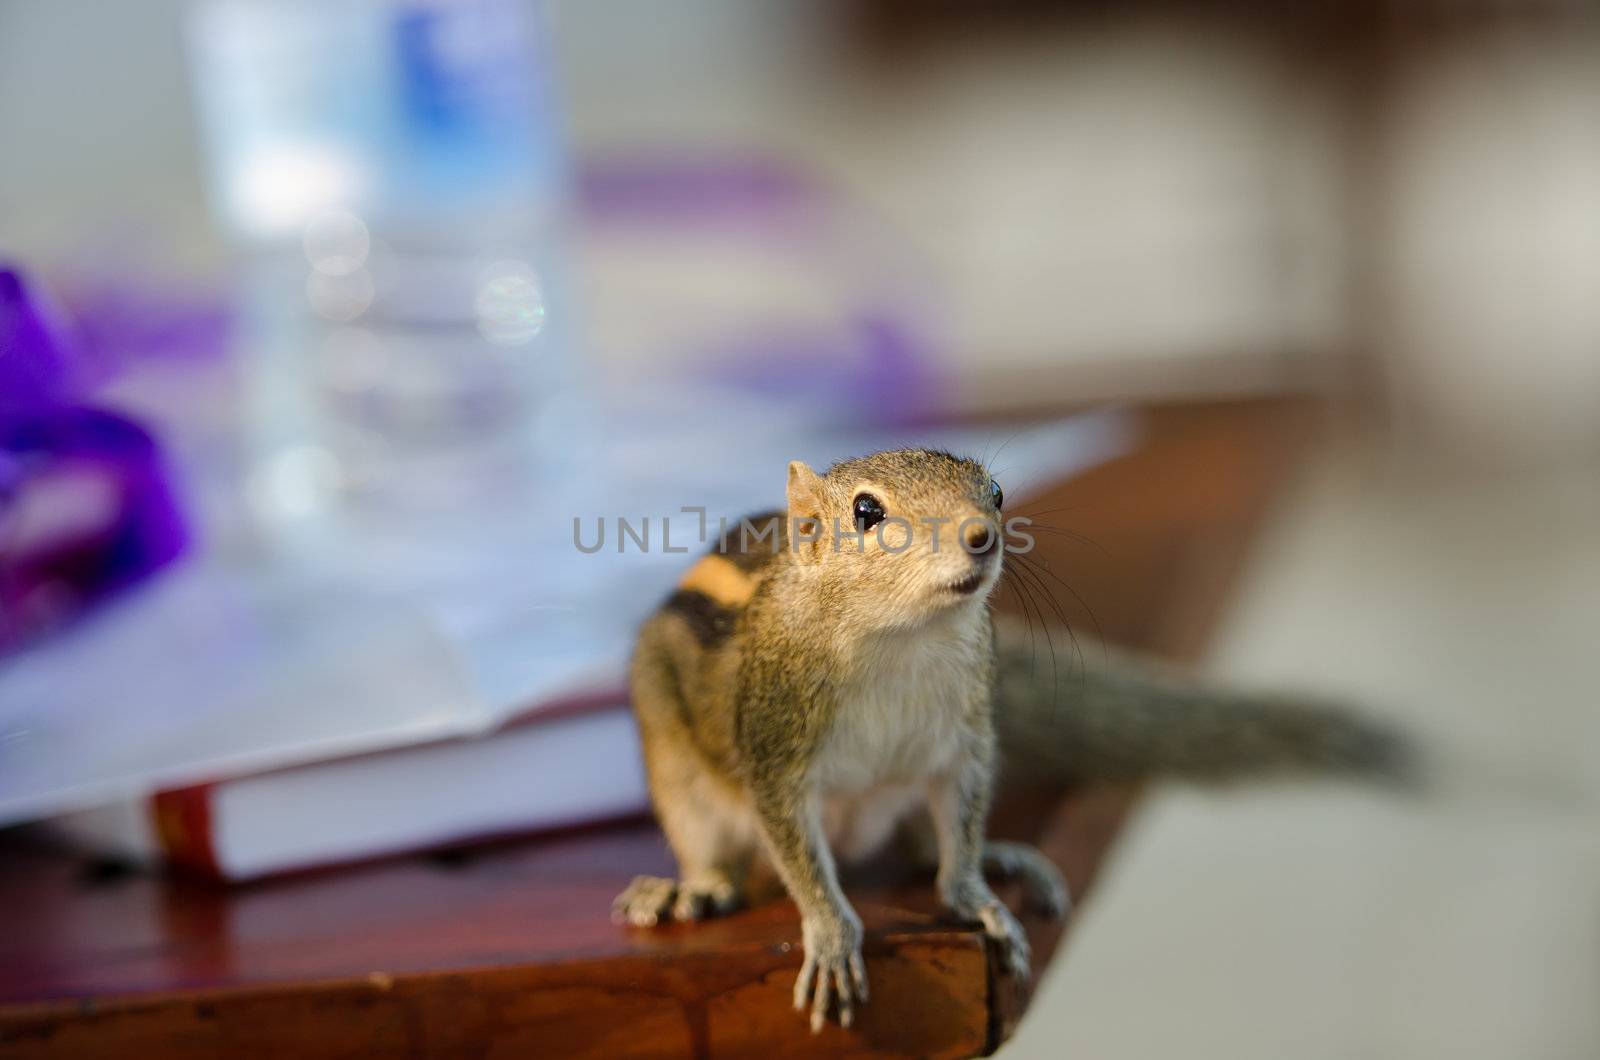 Curious downy chipmunk on table. Selective focus on the eye.